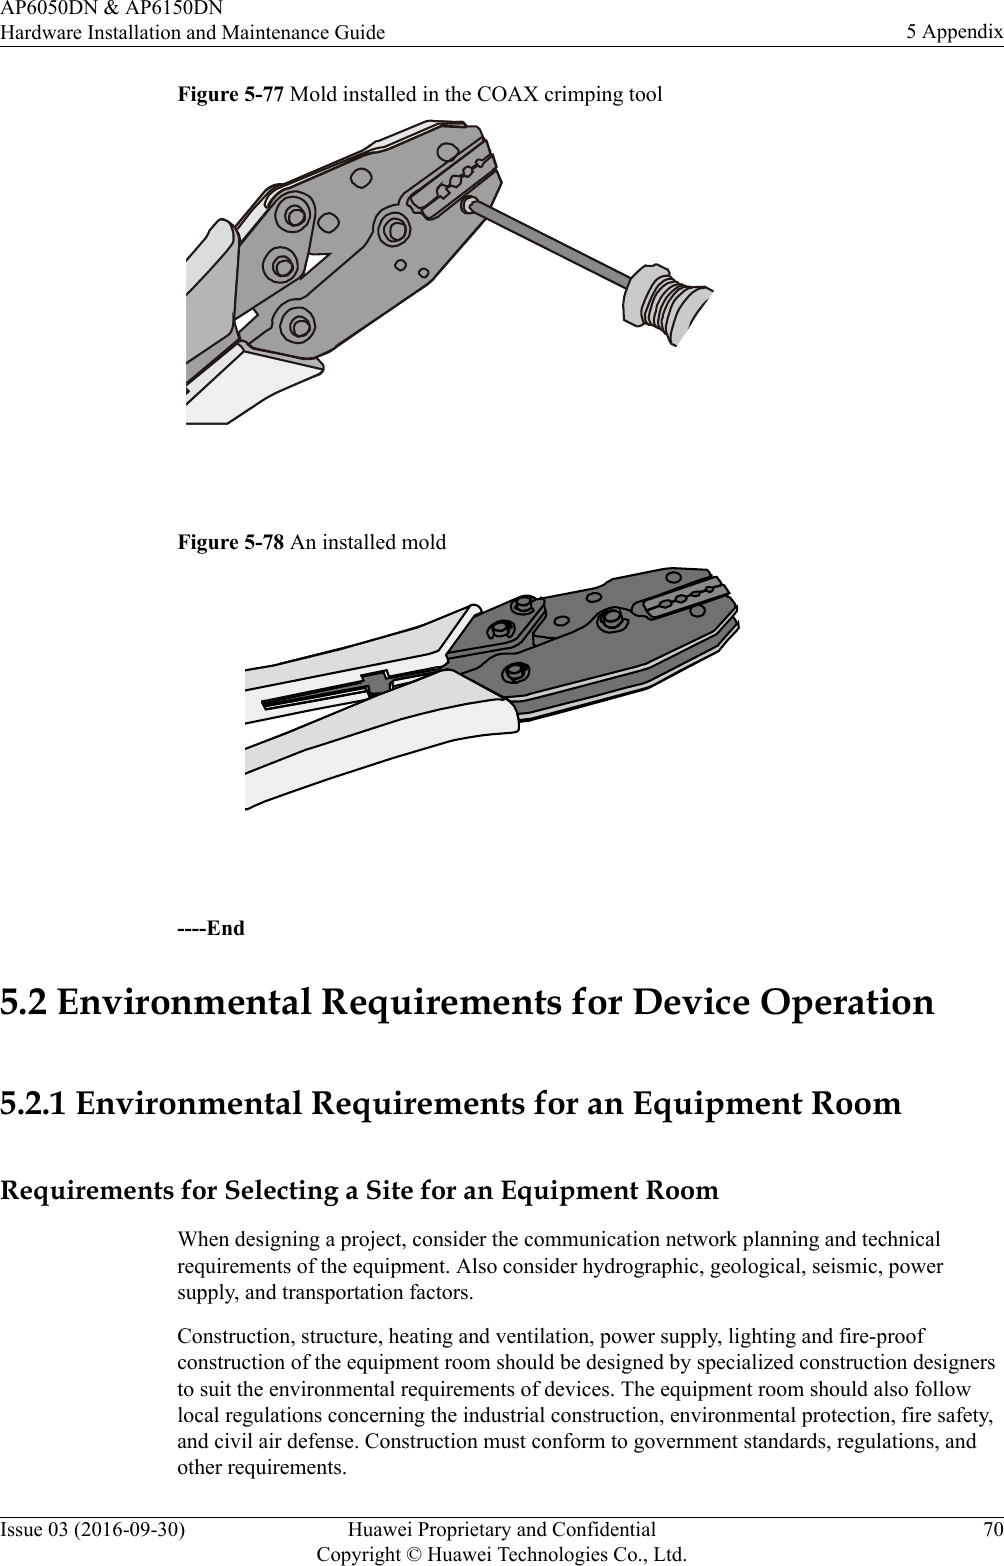 Figure 5-77 Mold installed in the COAX crimping tool Figure 5-78 An installed mold ----End5.2 Environmental Requirements for Device Operation5.2.1 Environmental Requirements for an Equipment RoomRequirements for Selecting a Site for an Equipment RoomWhen designing a project, consider the communication network planning and technicalrequirements of the equipment. Also consider hydrographic, geological, seismic, powersupply, and transportation factors.Construction, structure, heating and ventilation, power supply, lighting and fire-proofconstruction of the equipment room should be designed by specialized construction designersto suit the environmental requirements of devices. The equipment room should also followlocal regulations concerning the industrial construction, environmental protection, fire safety,and civil air defense. Construction must conform to government standards, regulations, andother requirements.AP6050DN &amp; AP6150DNHardware Installation and Maintenance Guide 5 AppendixIssue 03 (2016-09-30) Huawei Proprietary and ConfidentialCopyright © Huawei Technologies Co., Ltd.70